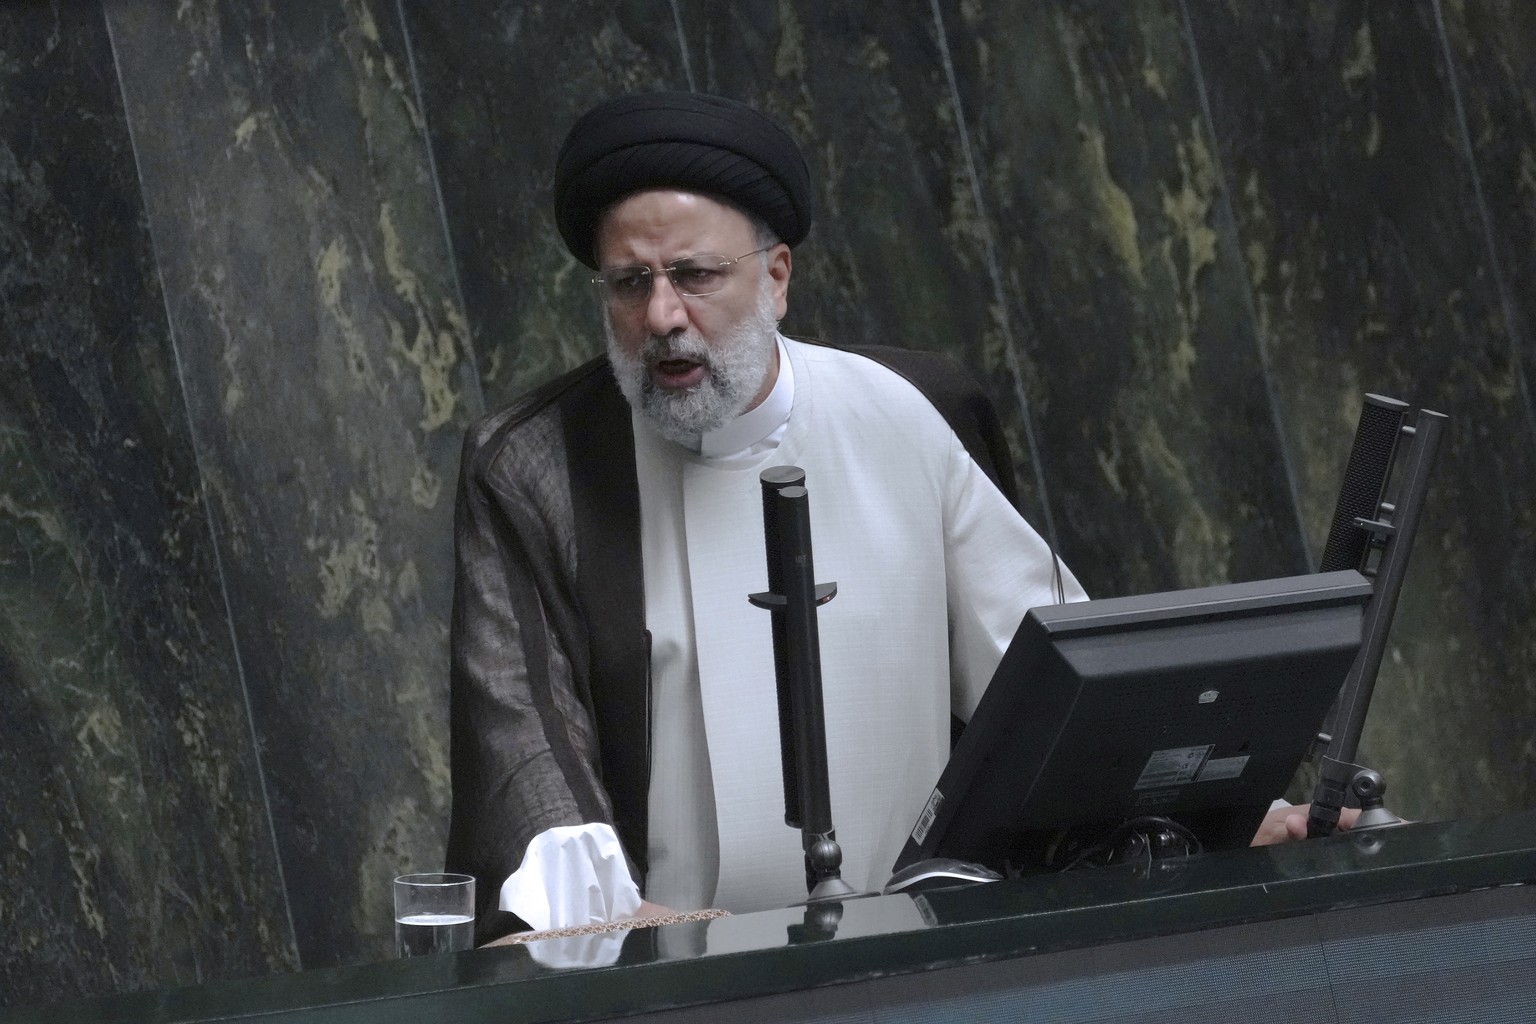 Iranian President Ebrahim Raisi addresses the parliament in a vote of confidence session for his proposed labor minister in Tehran, Iran, Tuesday, Oct. 4, 2022. (AP Photo/Vahid Salemi)
Ebrahim Raisi